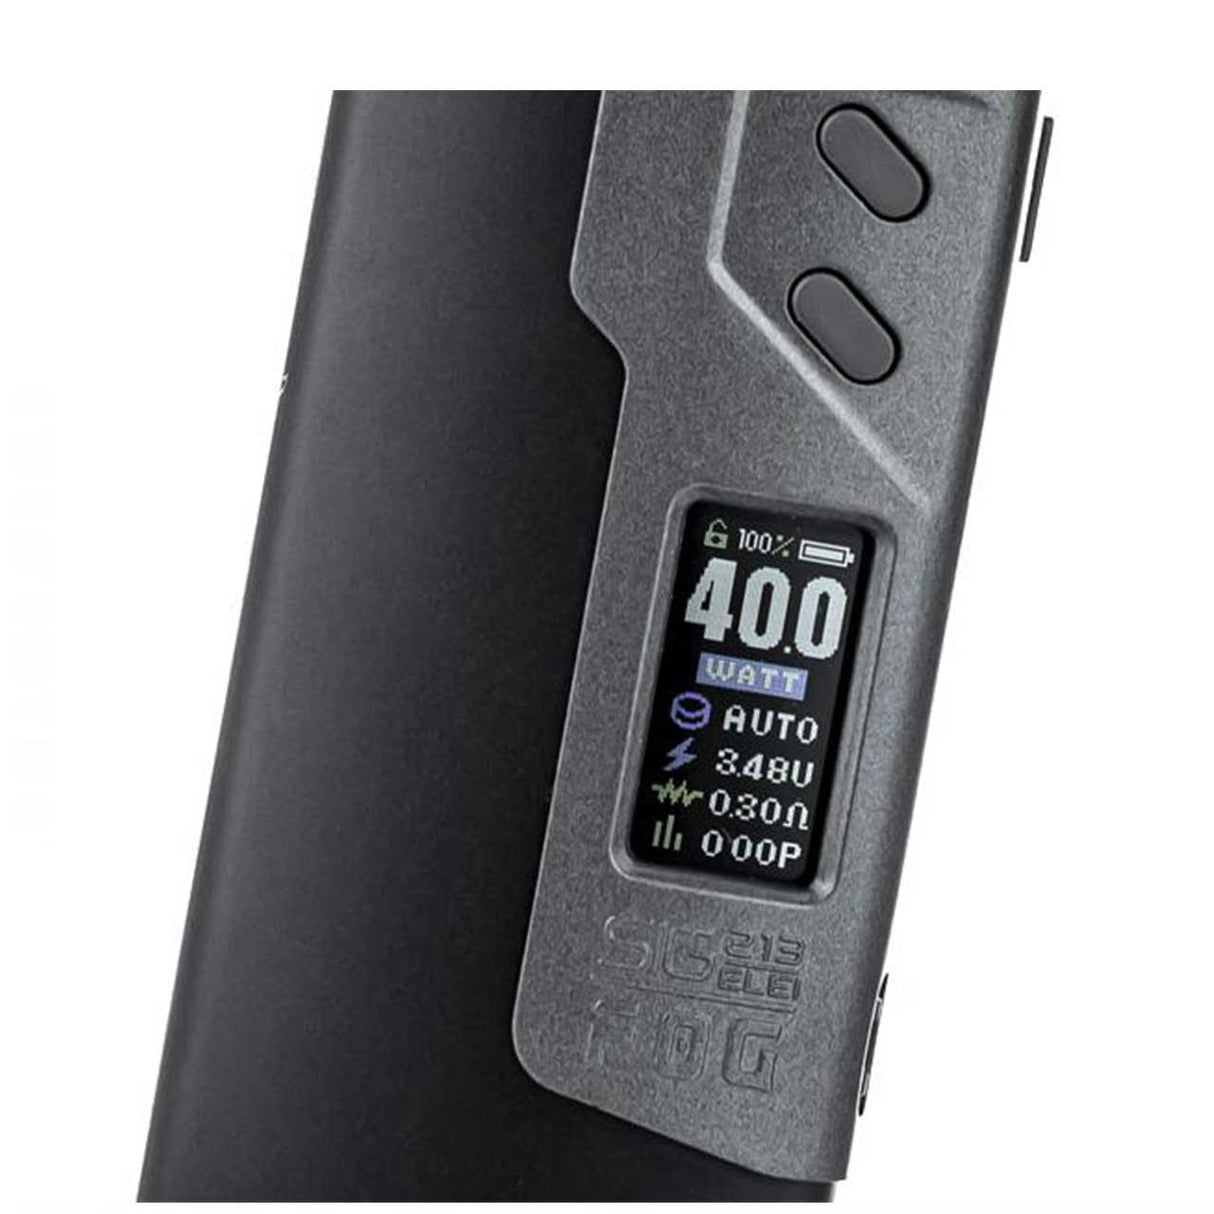 Sigelei 213w FOG Starter Vaping Kit with Large Read Out Screen for Better Control of Vaping Experience.